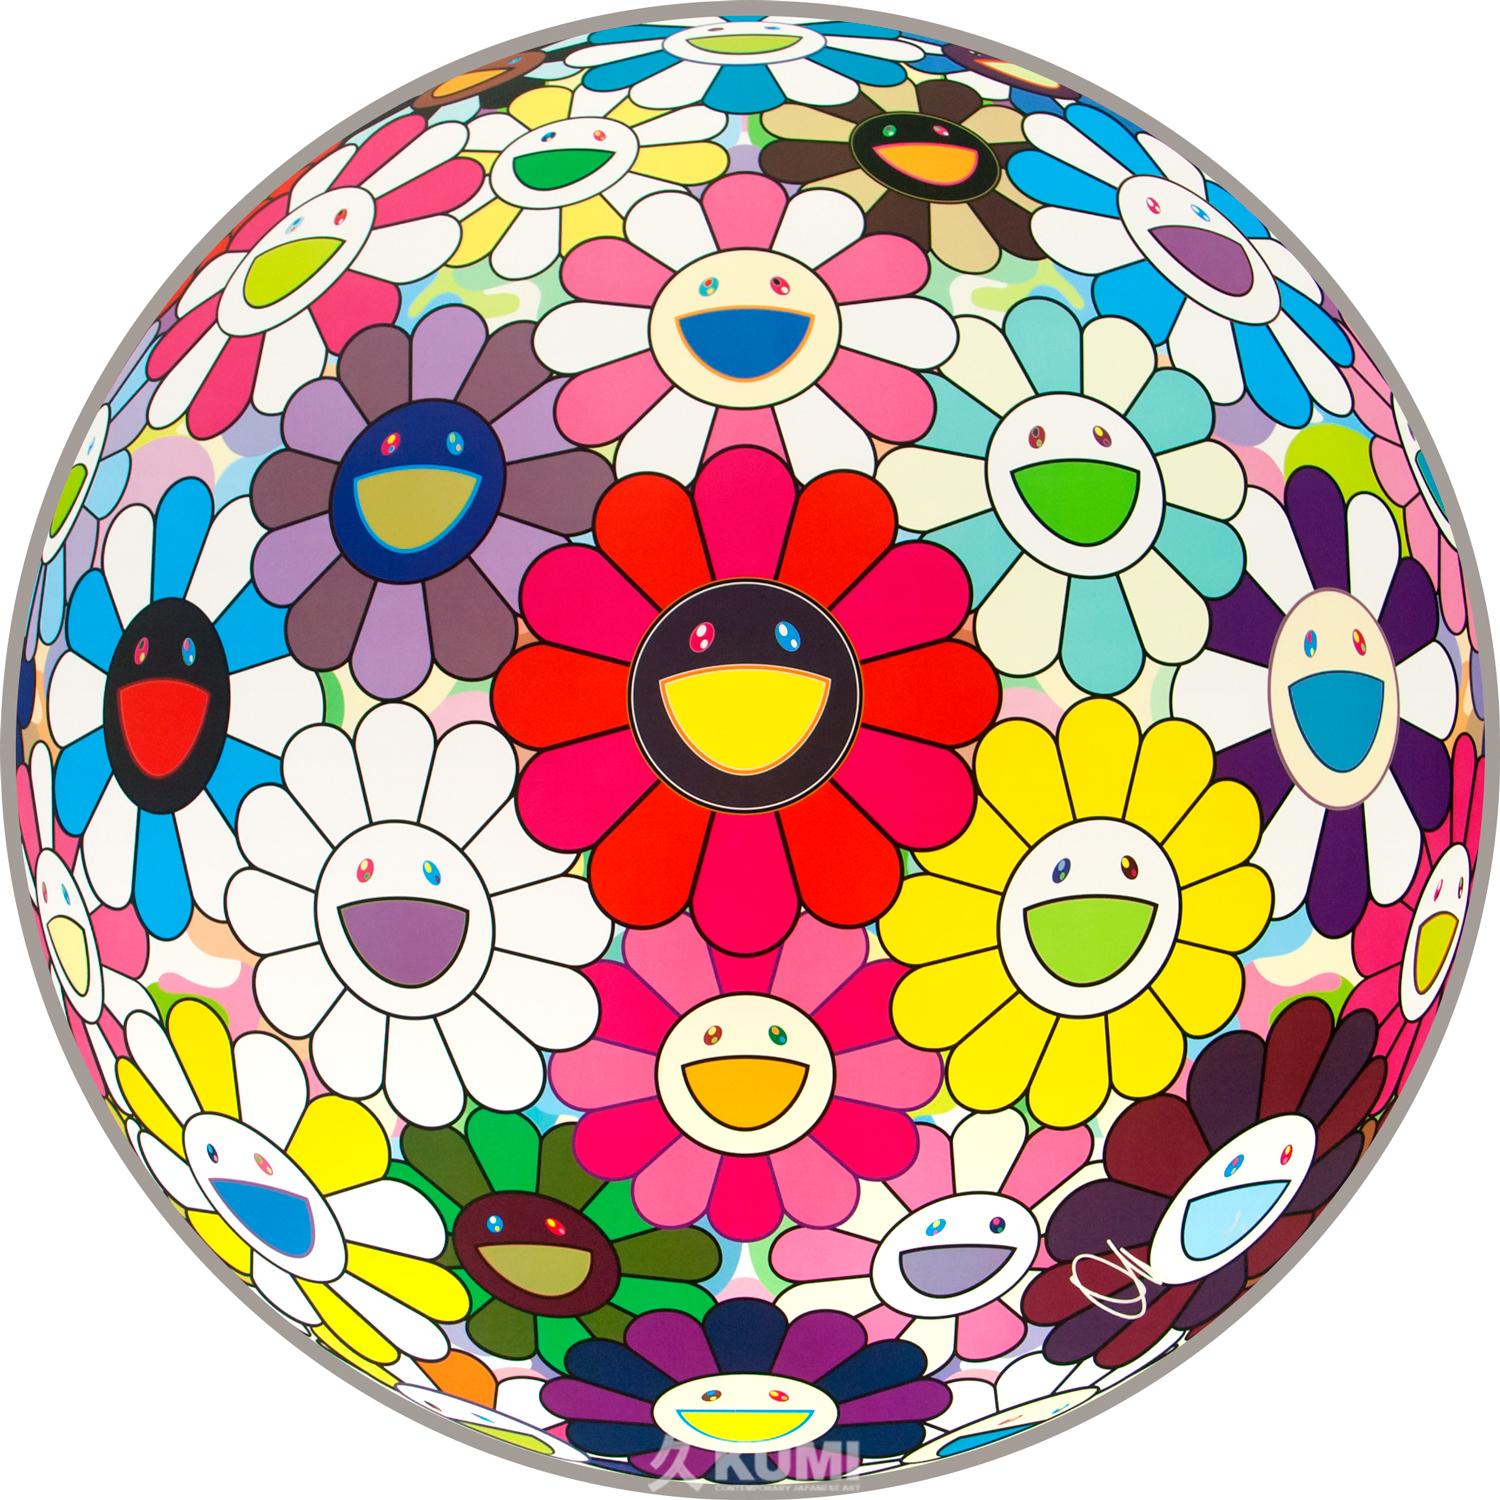 Takashi Murakami Abstract Print - Flower Ball Open Your Hands Wide Signed Limited Edition Print, Edition of 300